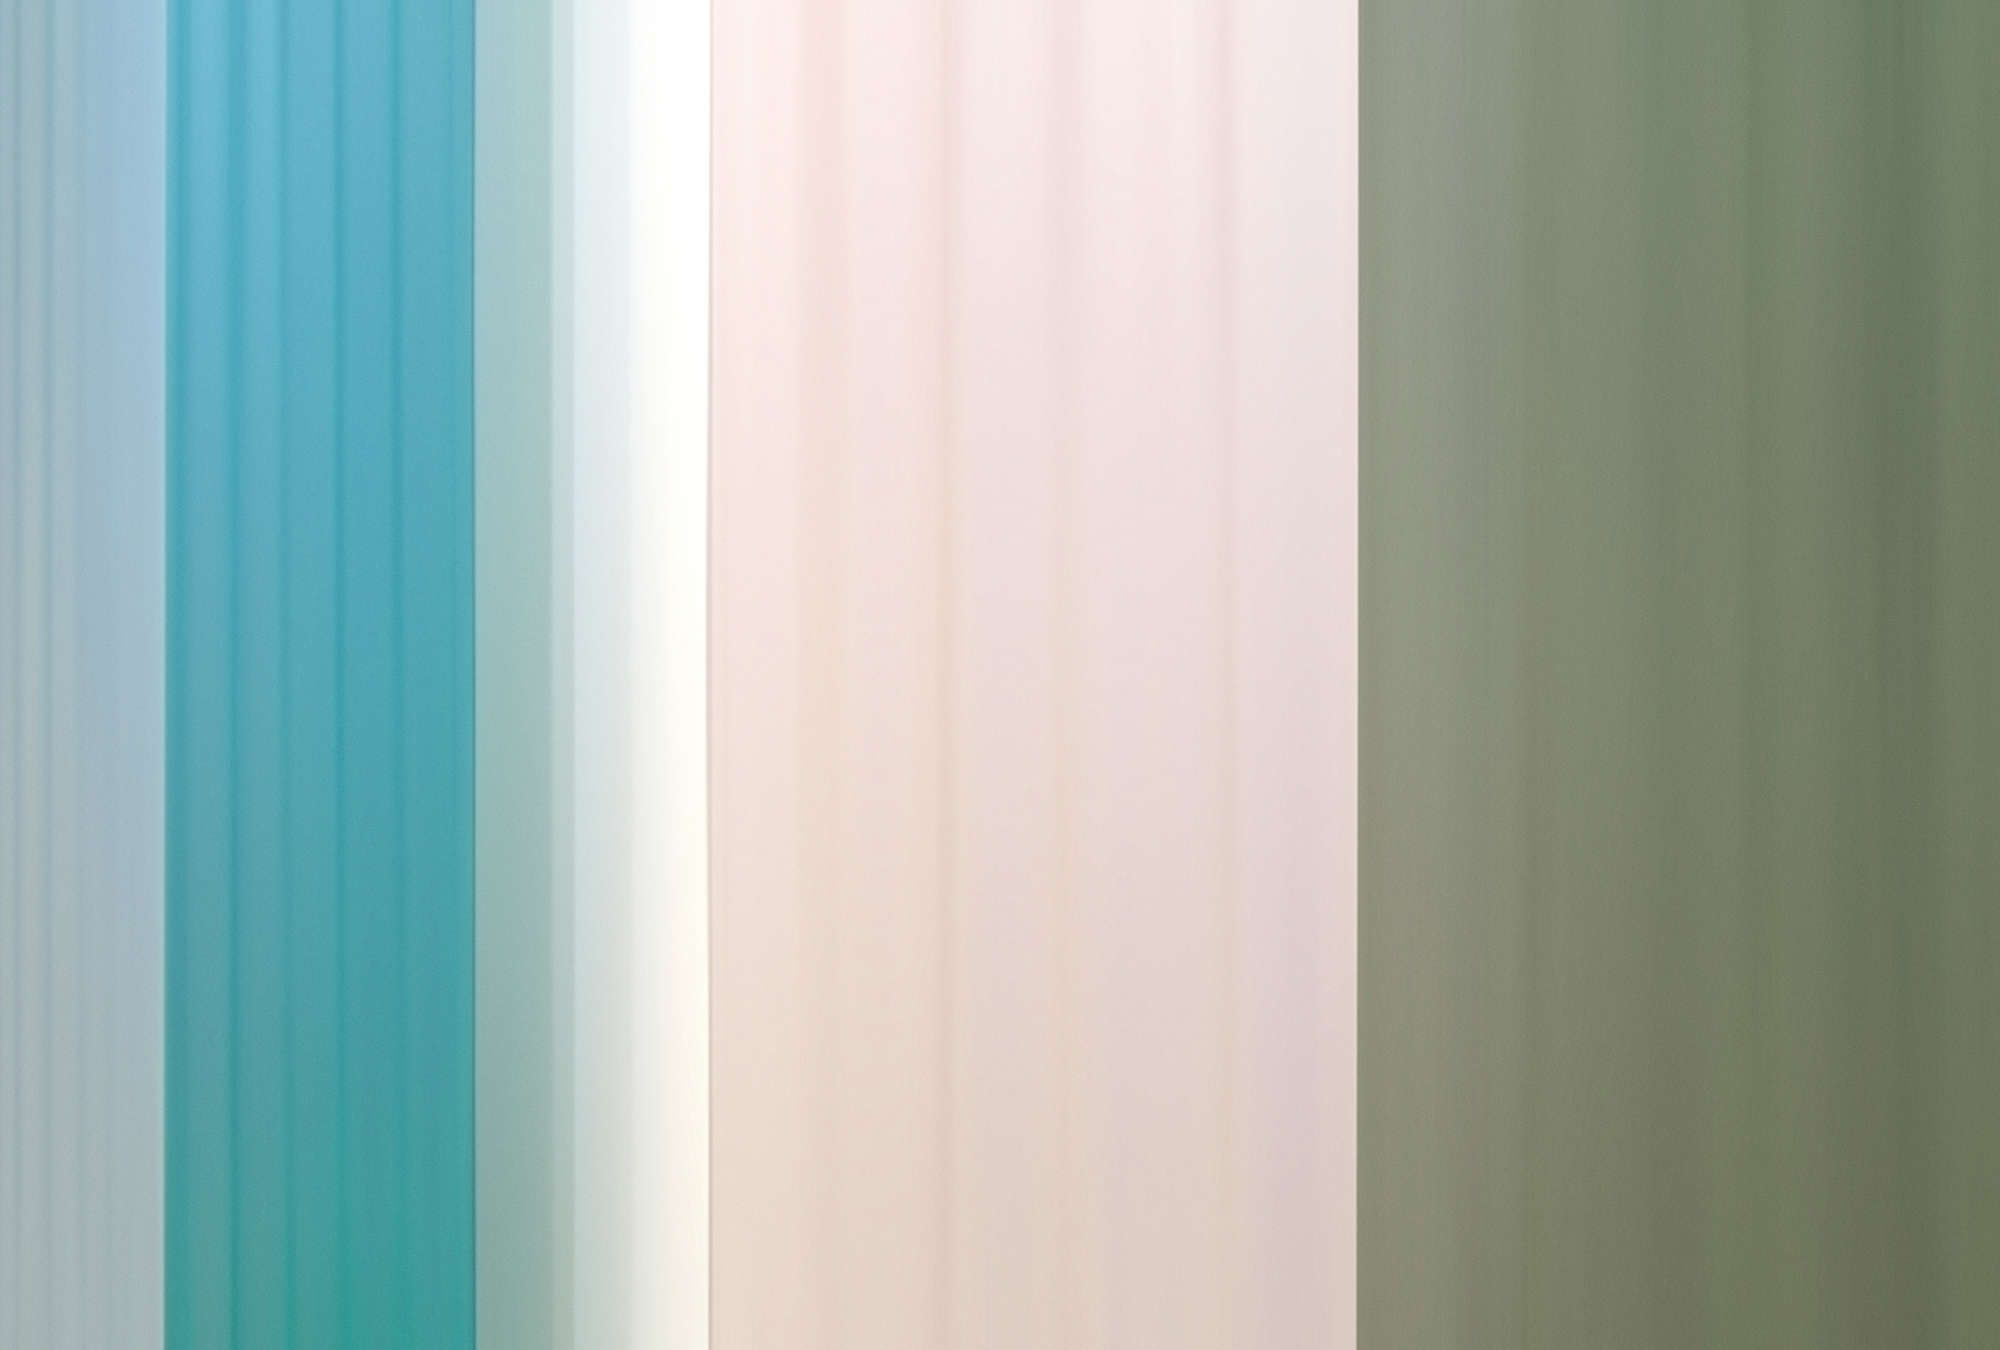             Photo wallpaper »co-coloures 4« - Colour gradient with stripes - turquoise, cream, green | Smooth, slightly shiny premium non-woven fabric
        